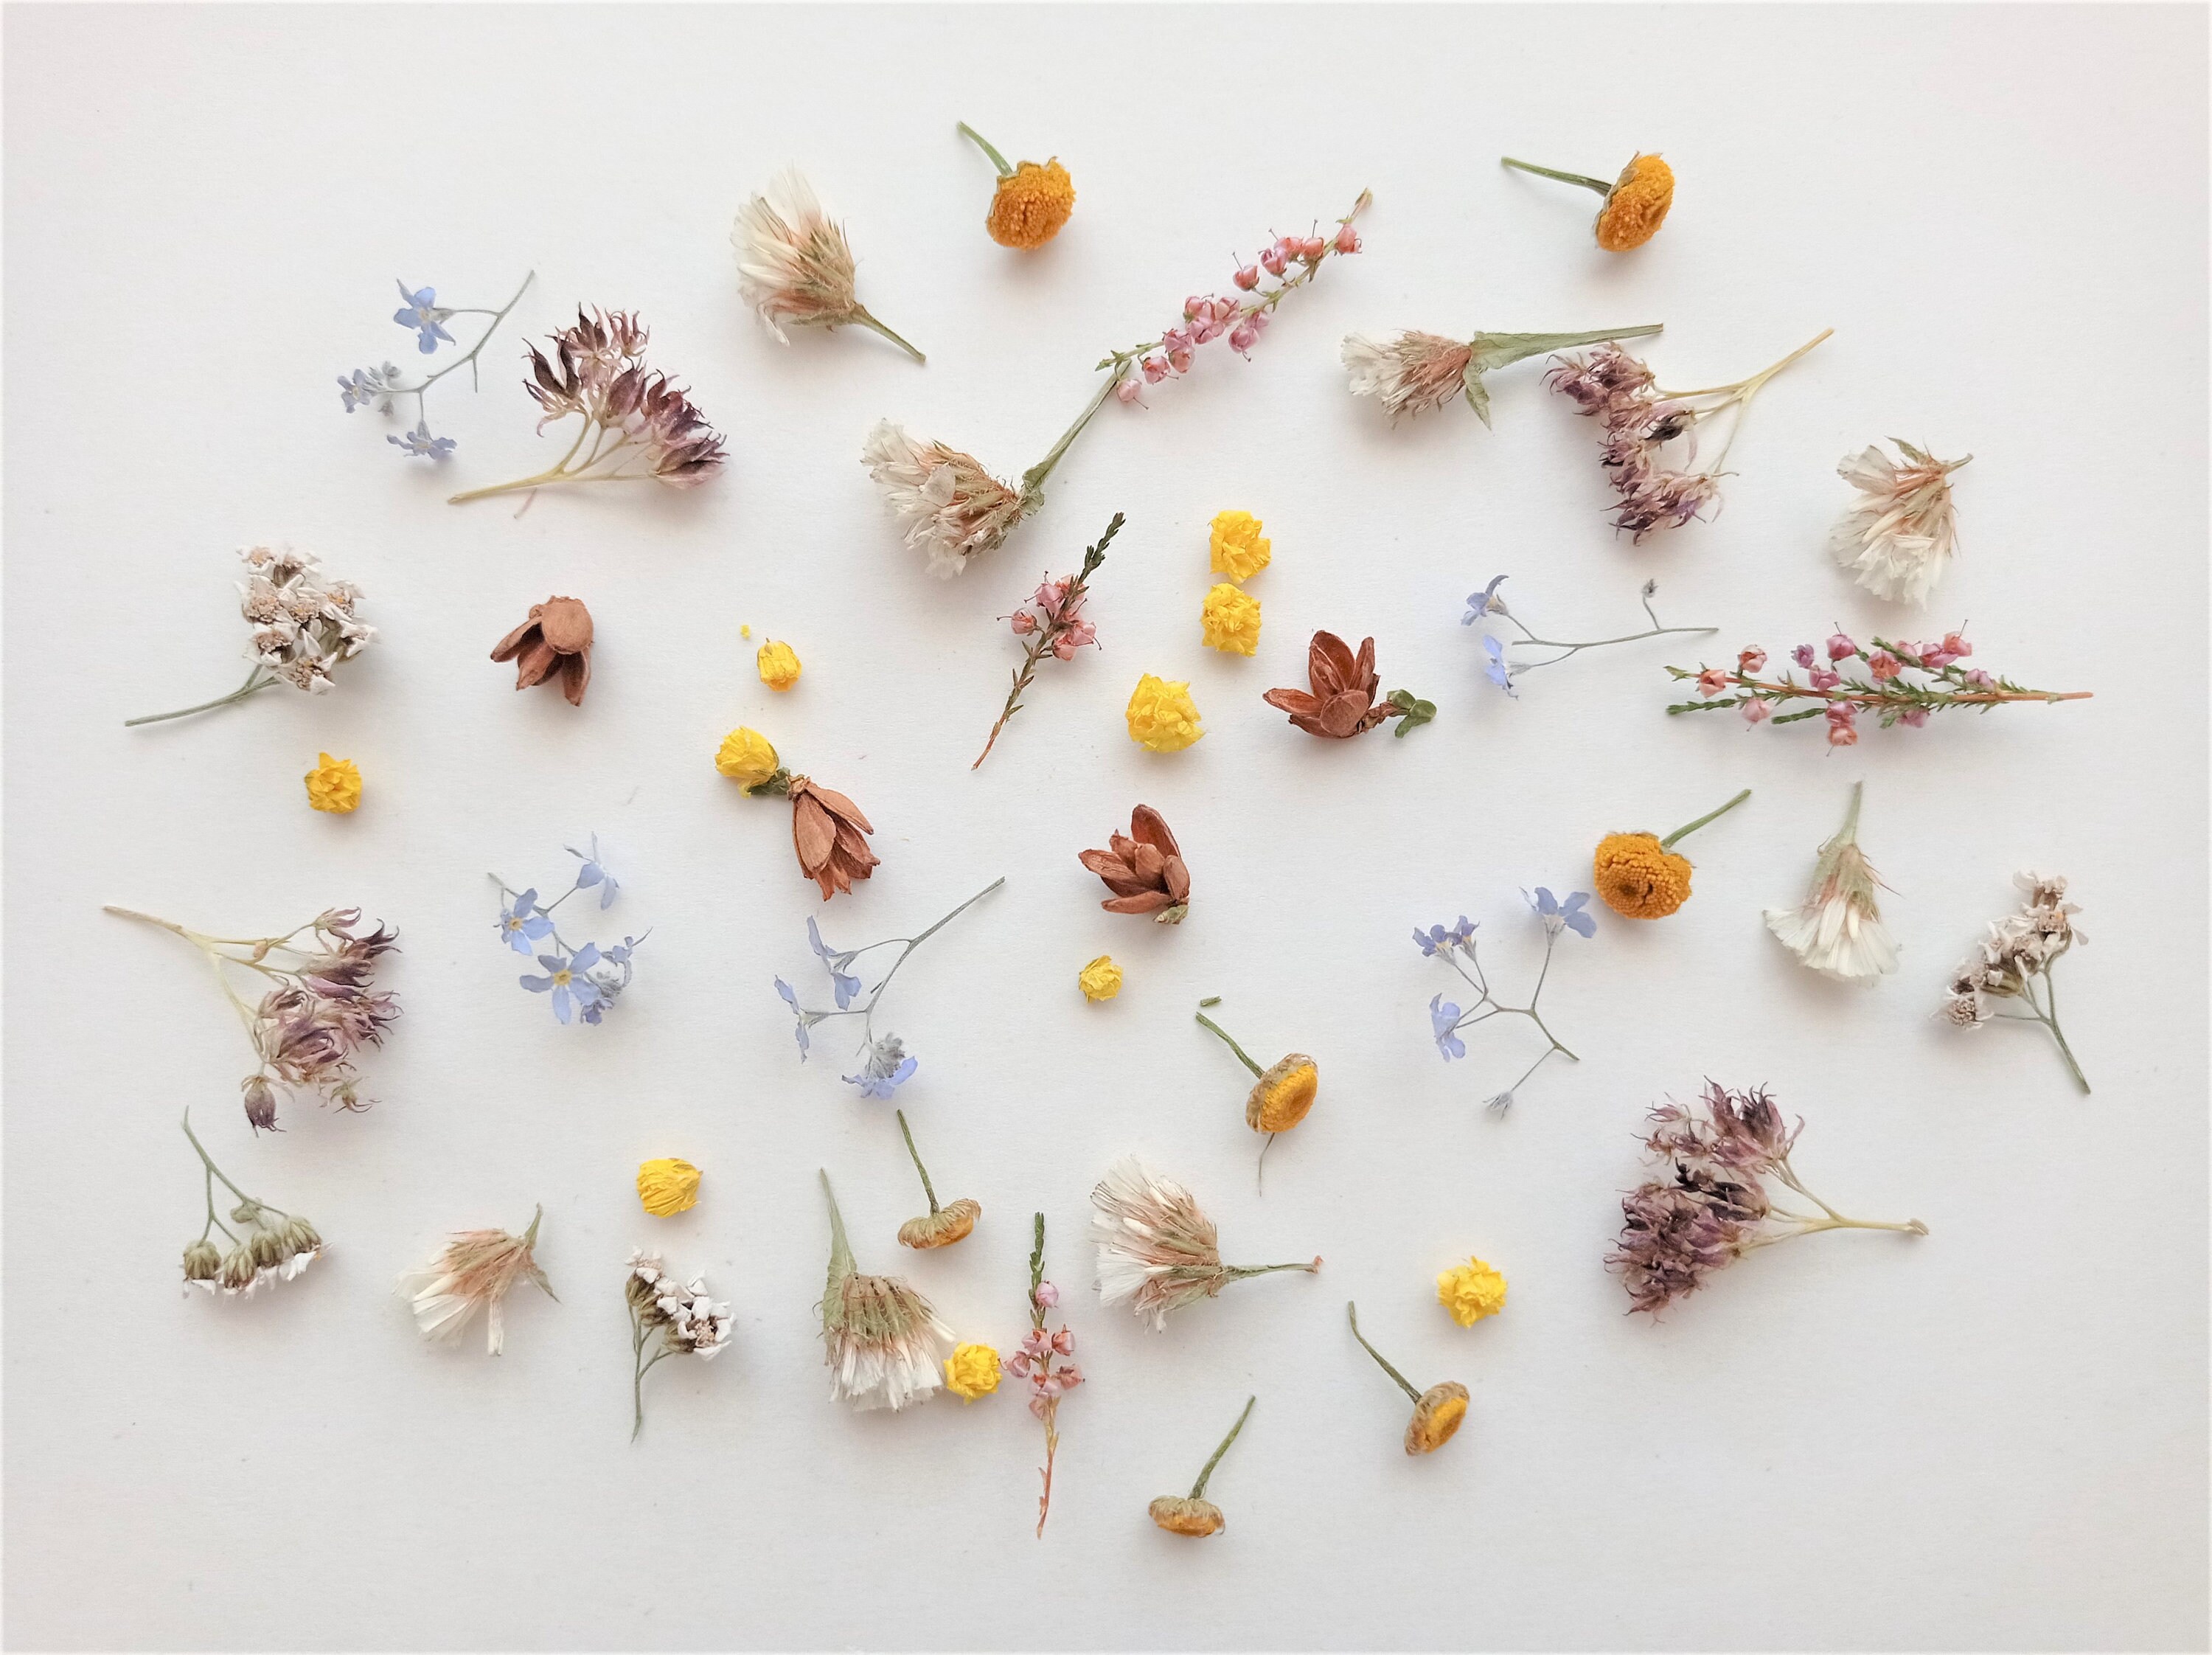 Dried Tiny Flowers for Resin, Tiny Flowers for Resin Jewelry